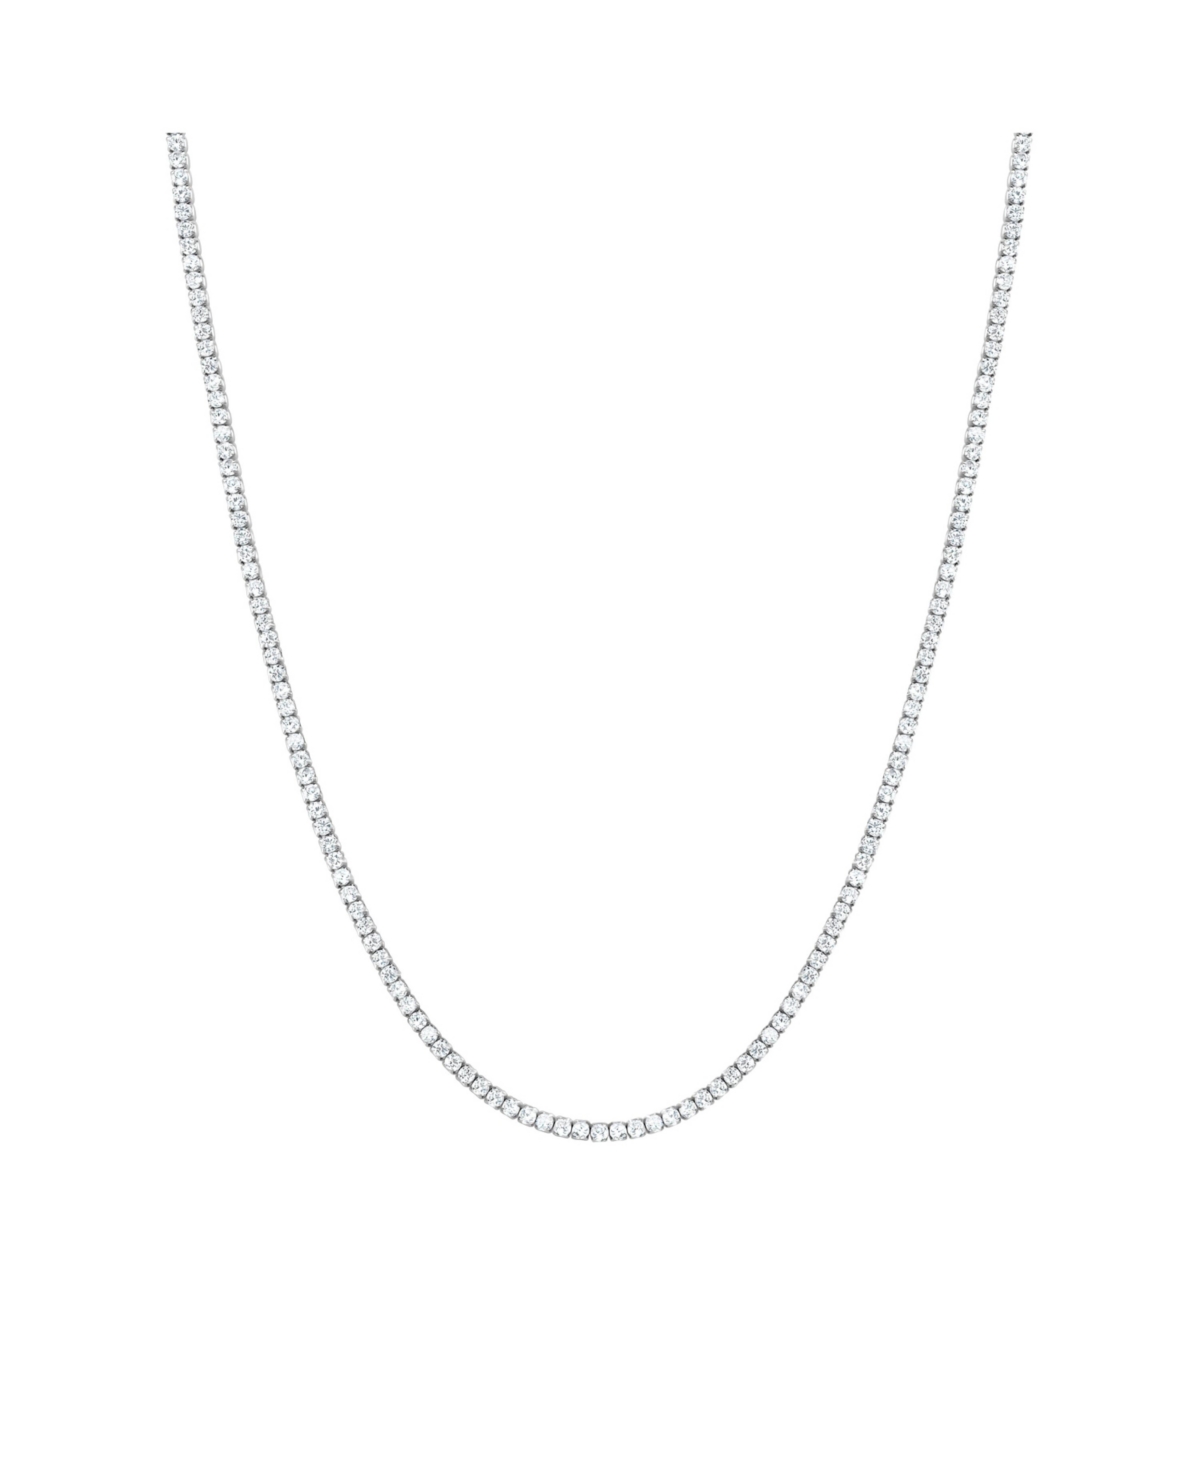 3A Cubic Zirconia Vintage inspired Necklace - Silver